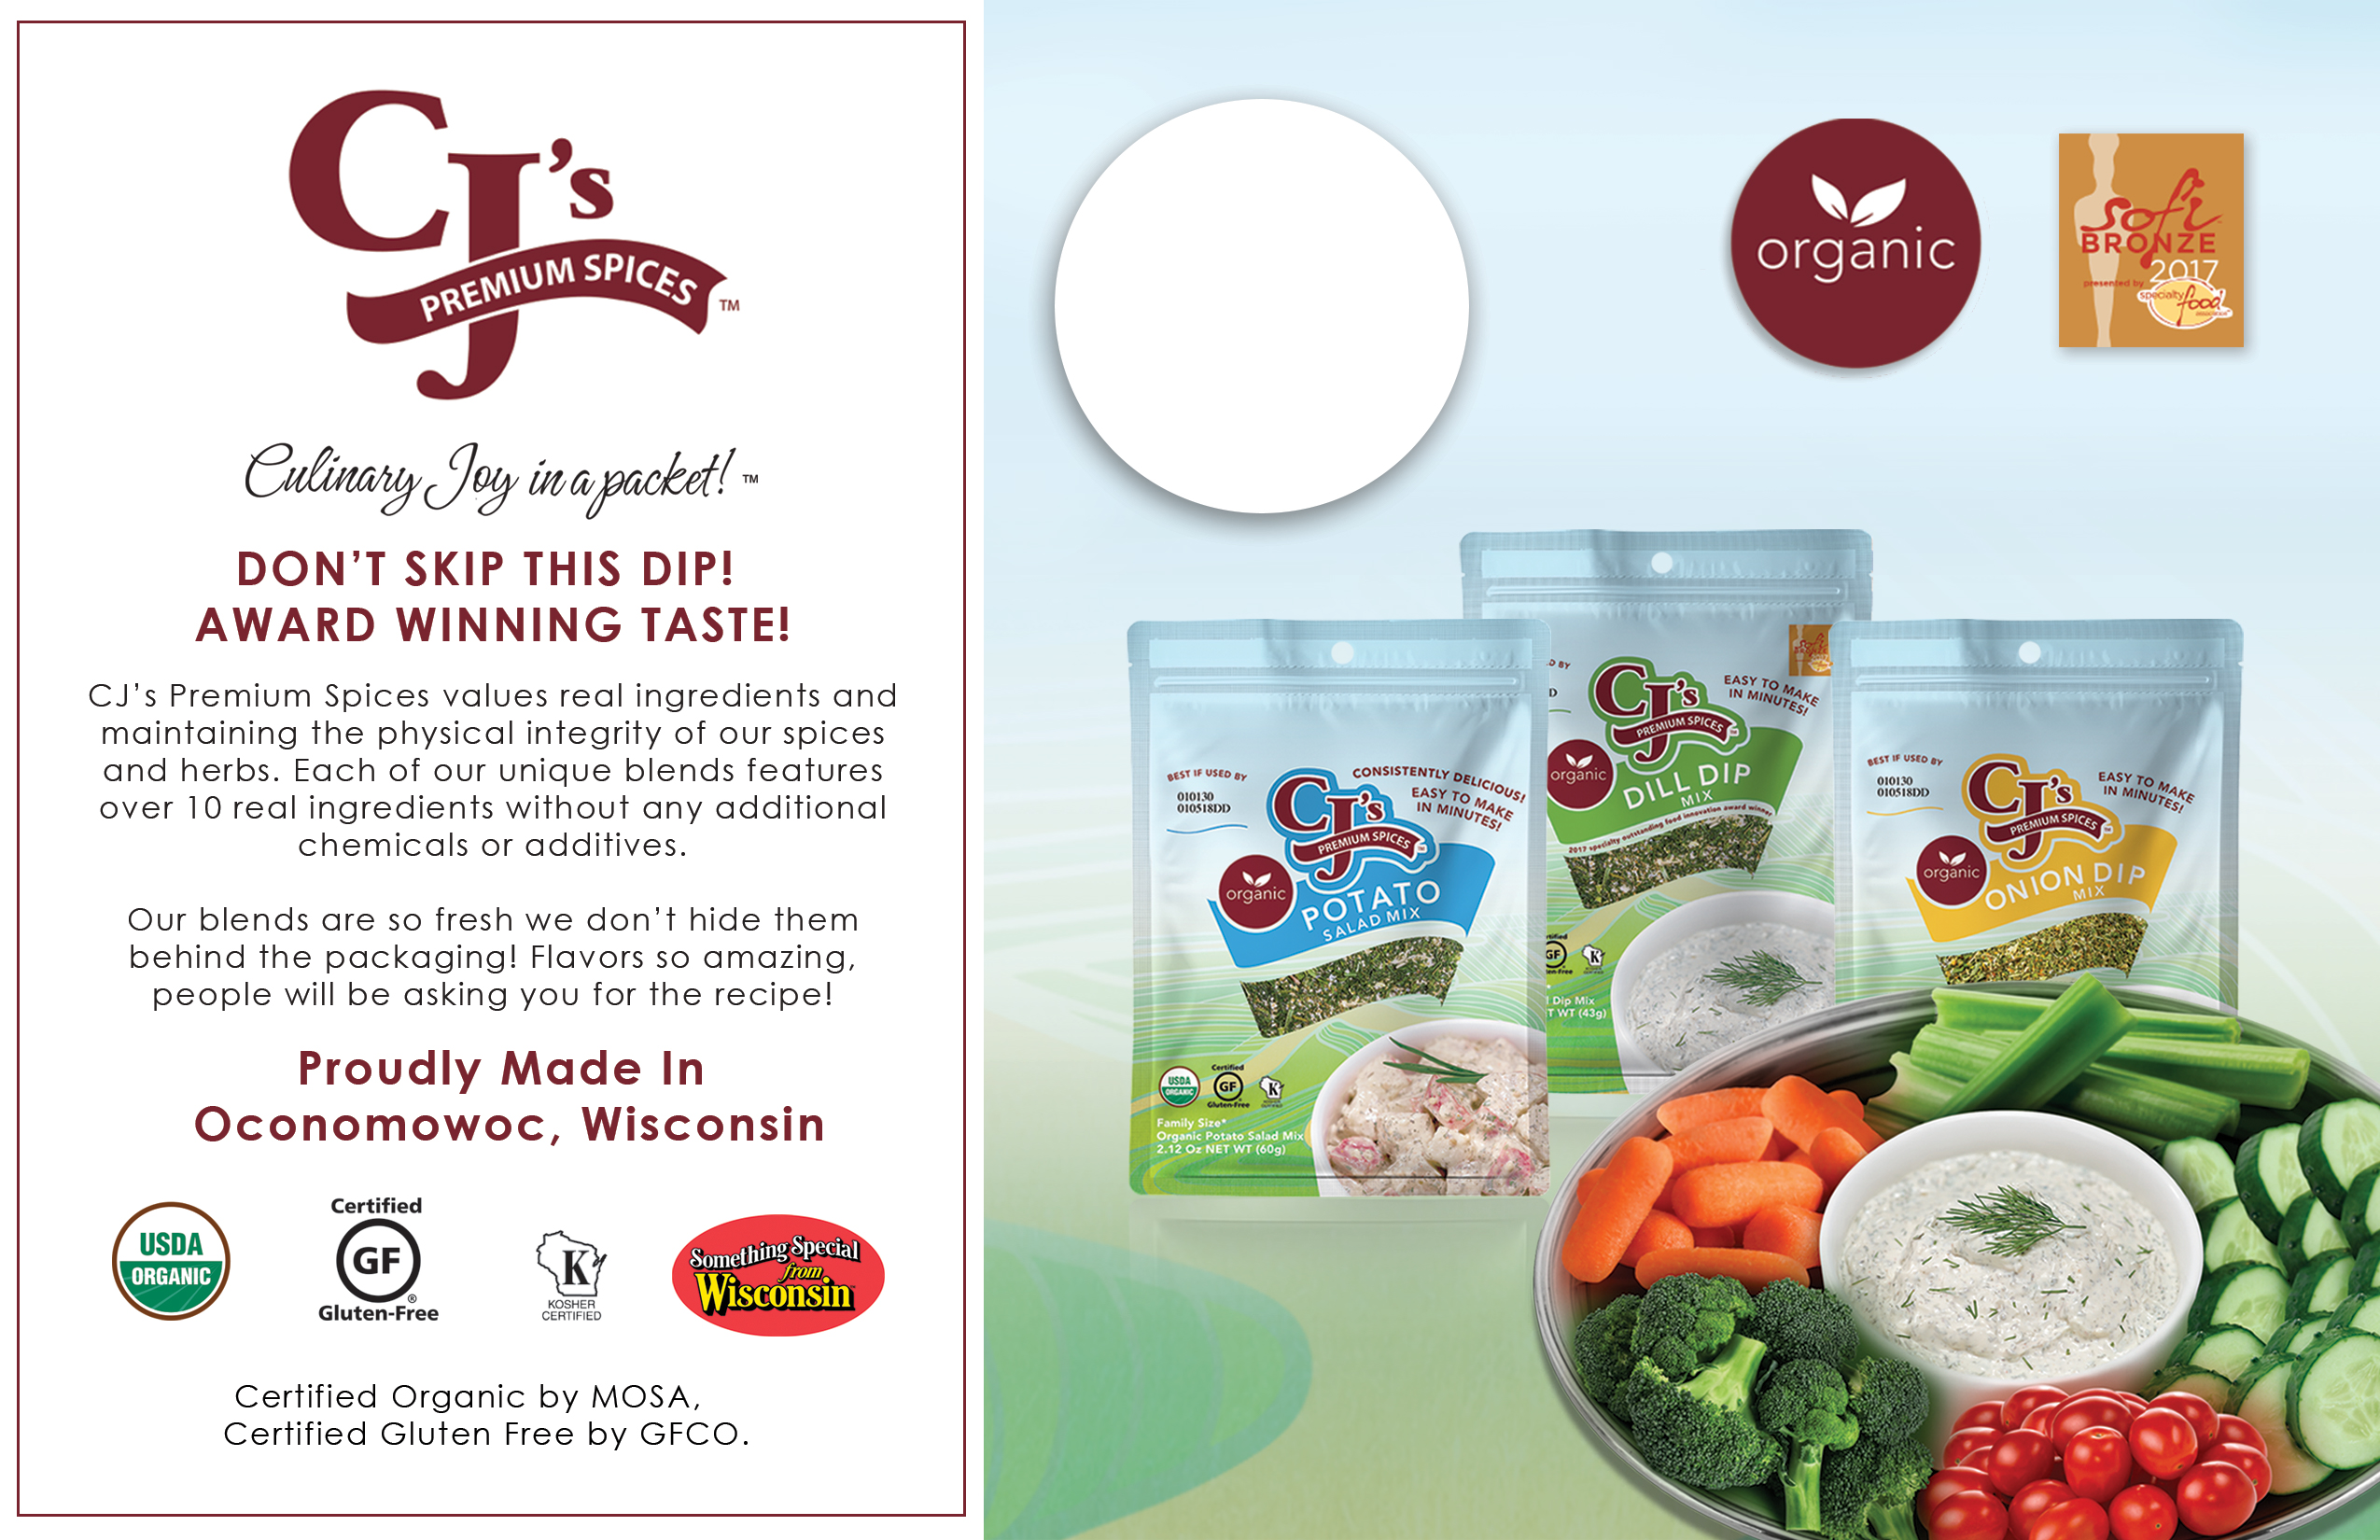 Organic Foods, CJ's Premium Spices Products